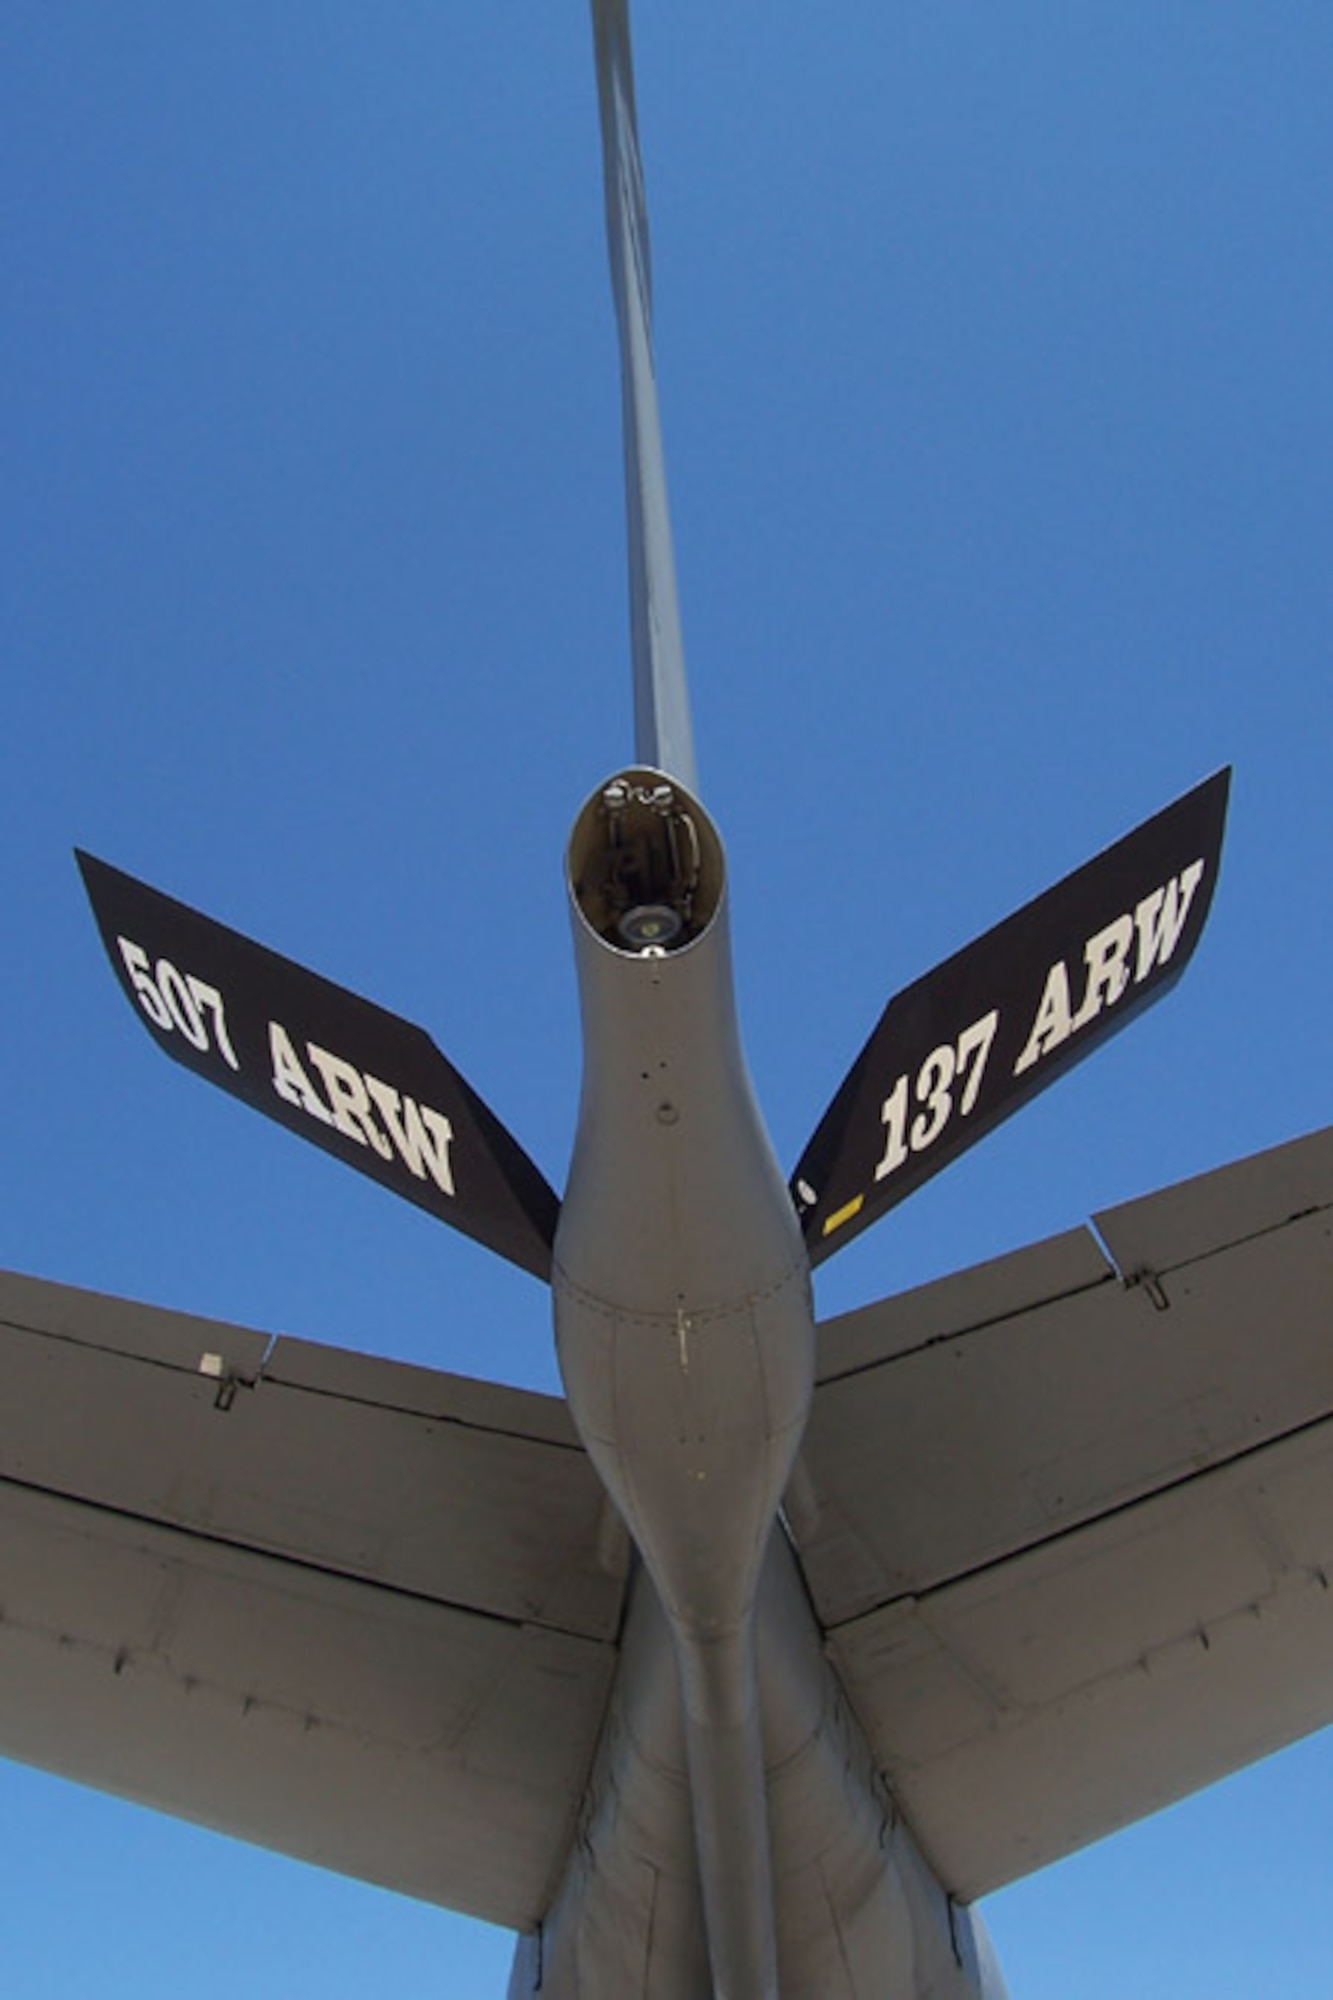 In a sign of the times, the ruddervator of KC-135R aircraft number 58-0121 now reflects the merger of the Air Force Reserve's 507th Air Refueling Wing and the Air National Guard's 137th Air Refueling Wing to all future air refueling receivers.  The two wings merged, with the 137th ARW becoming an associate wing to the 507th ARW, as a decision from the 2005 Base Realignment  and Closure (BRAC) process.  This new partnership represents the first time for an Air National Guard wing to be associated to an Air Force Reserve wing.